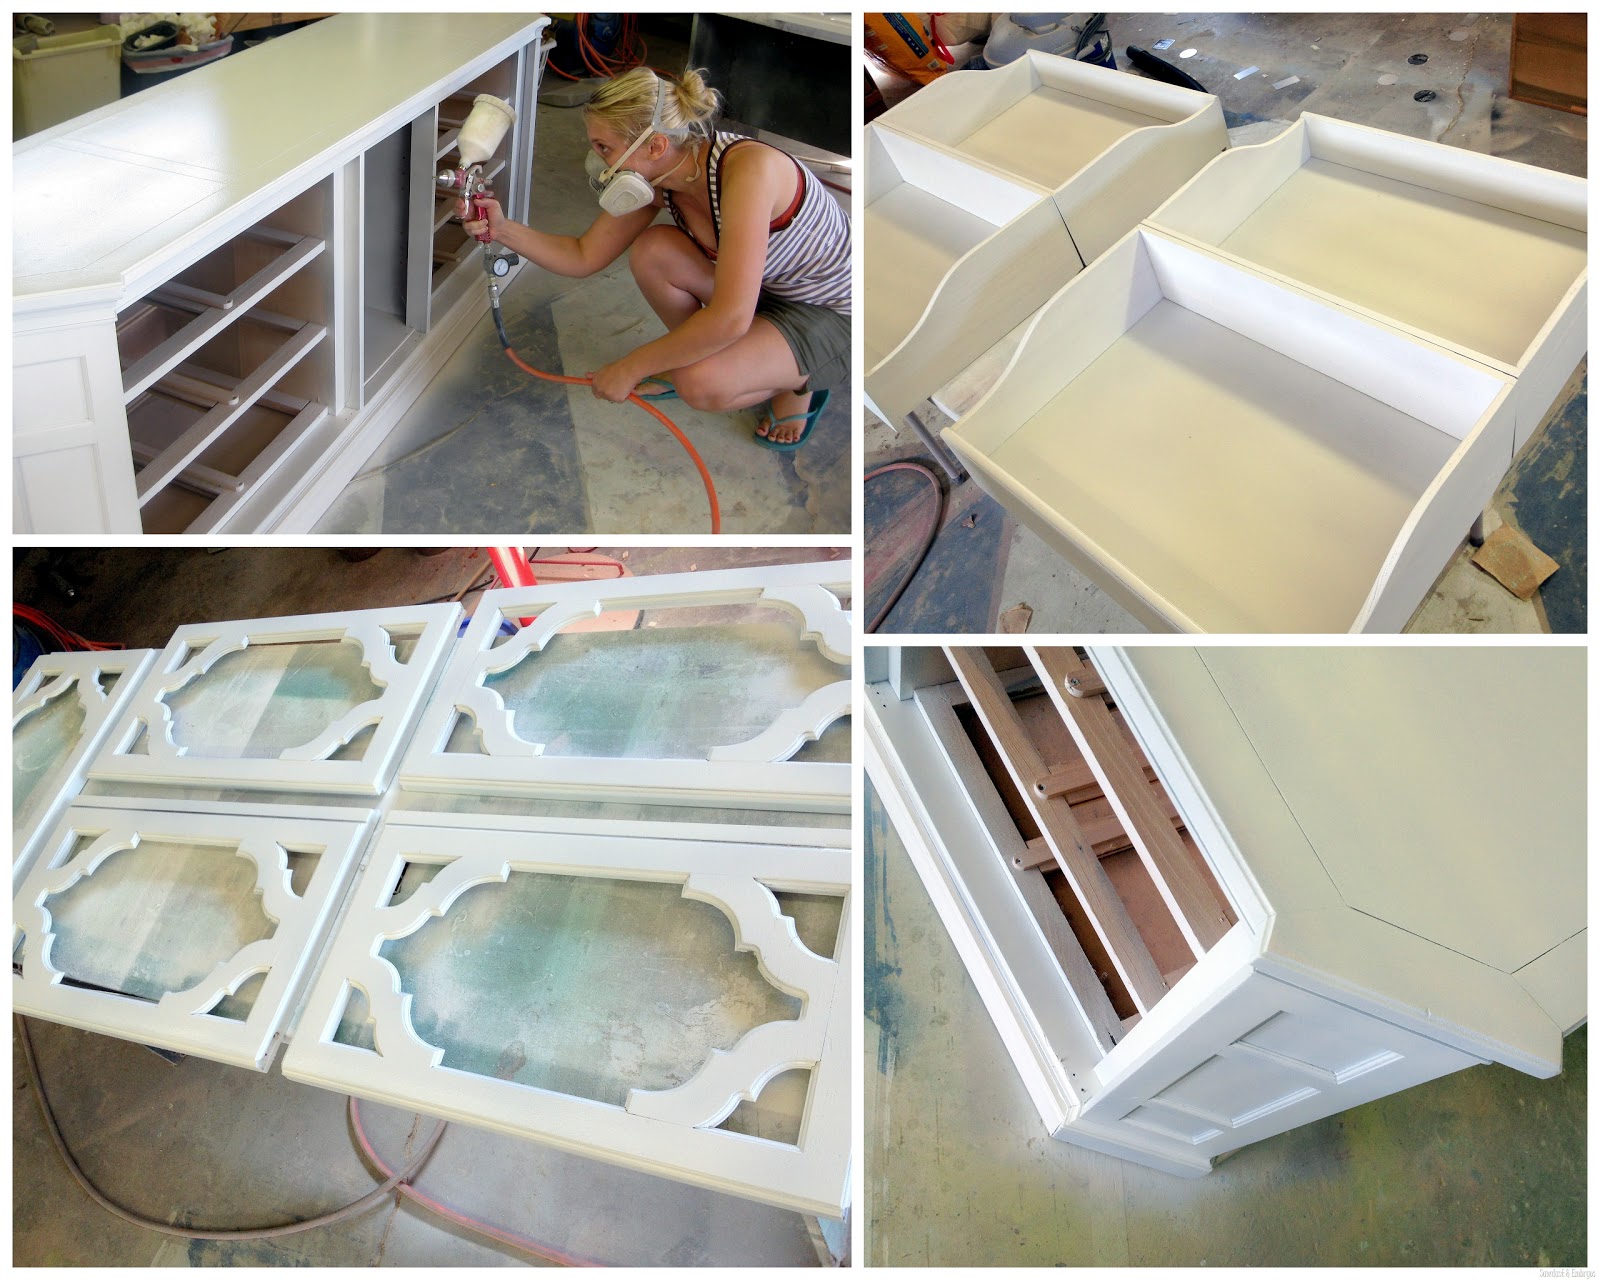 [A-White-Paint-Job-for-the-Credenza-S%255B1%255D.jpg]